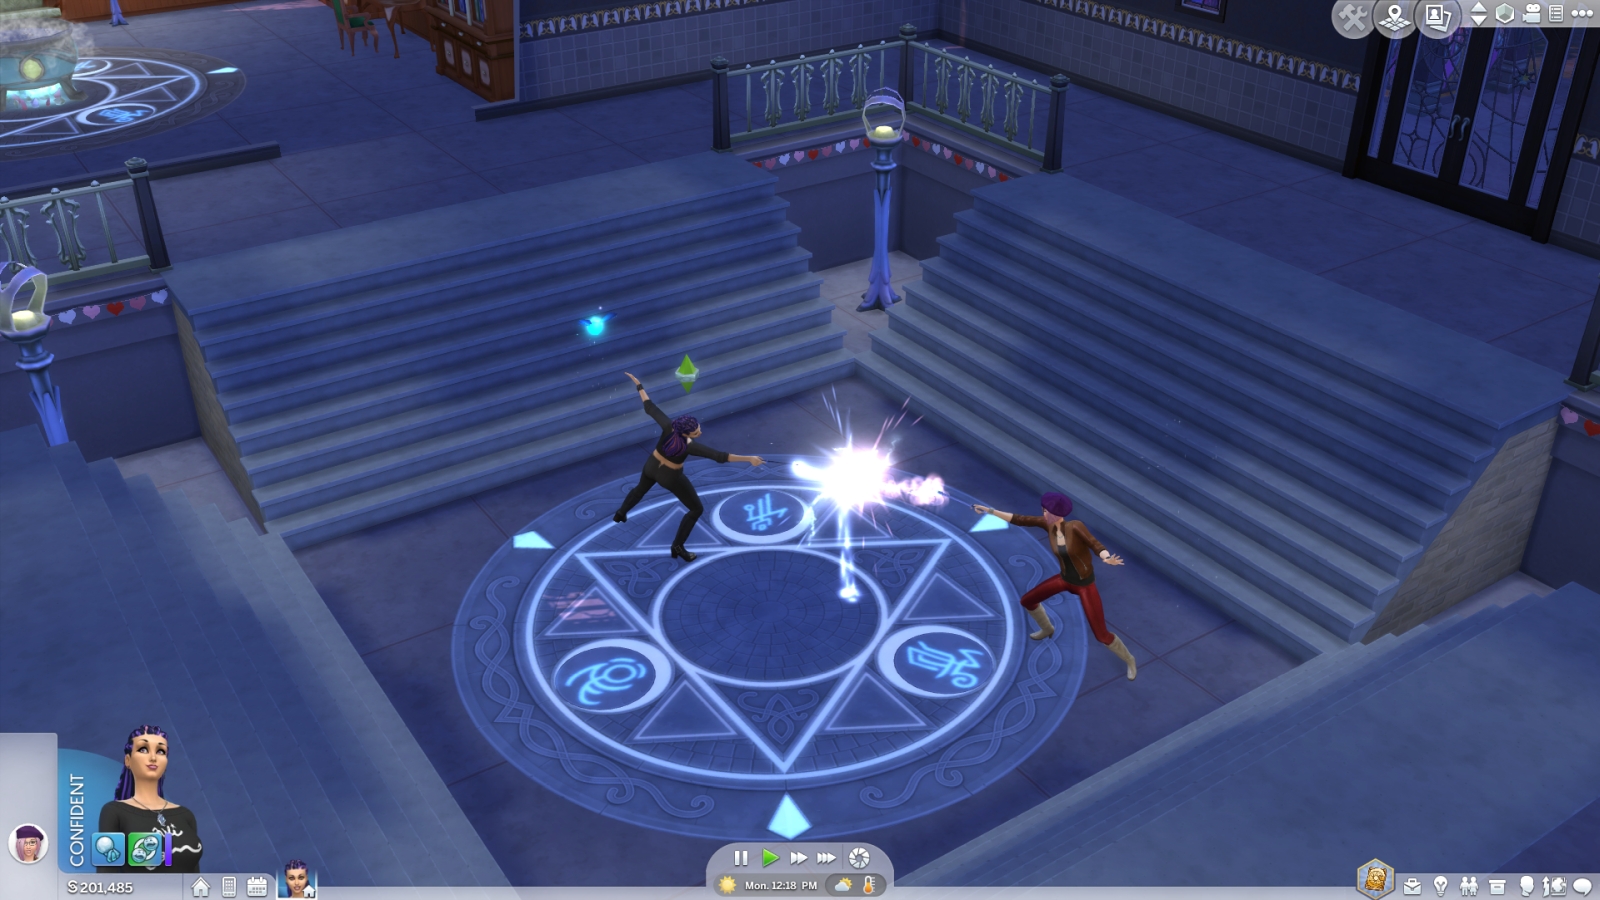 A little magic can take you a long way — The Sims 4: Realm of Magic review – GAMING TREND